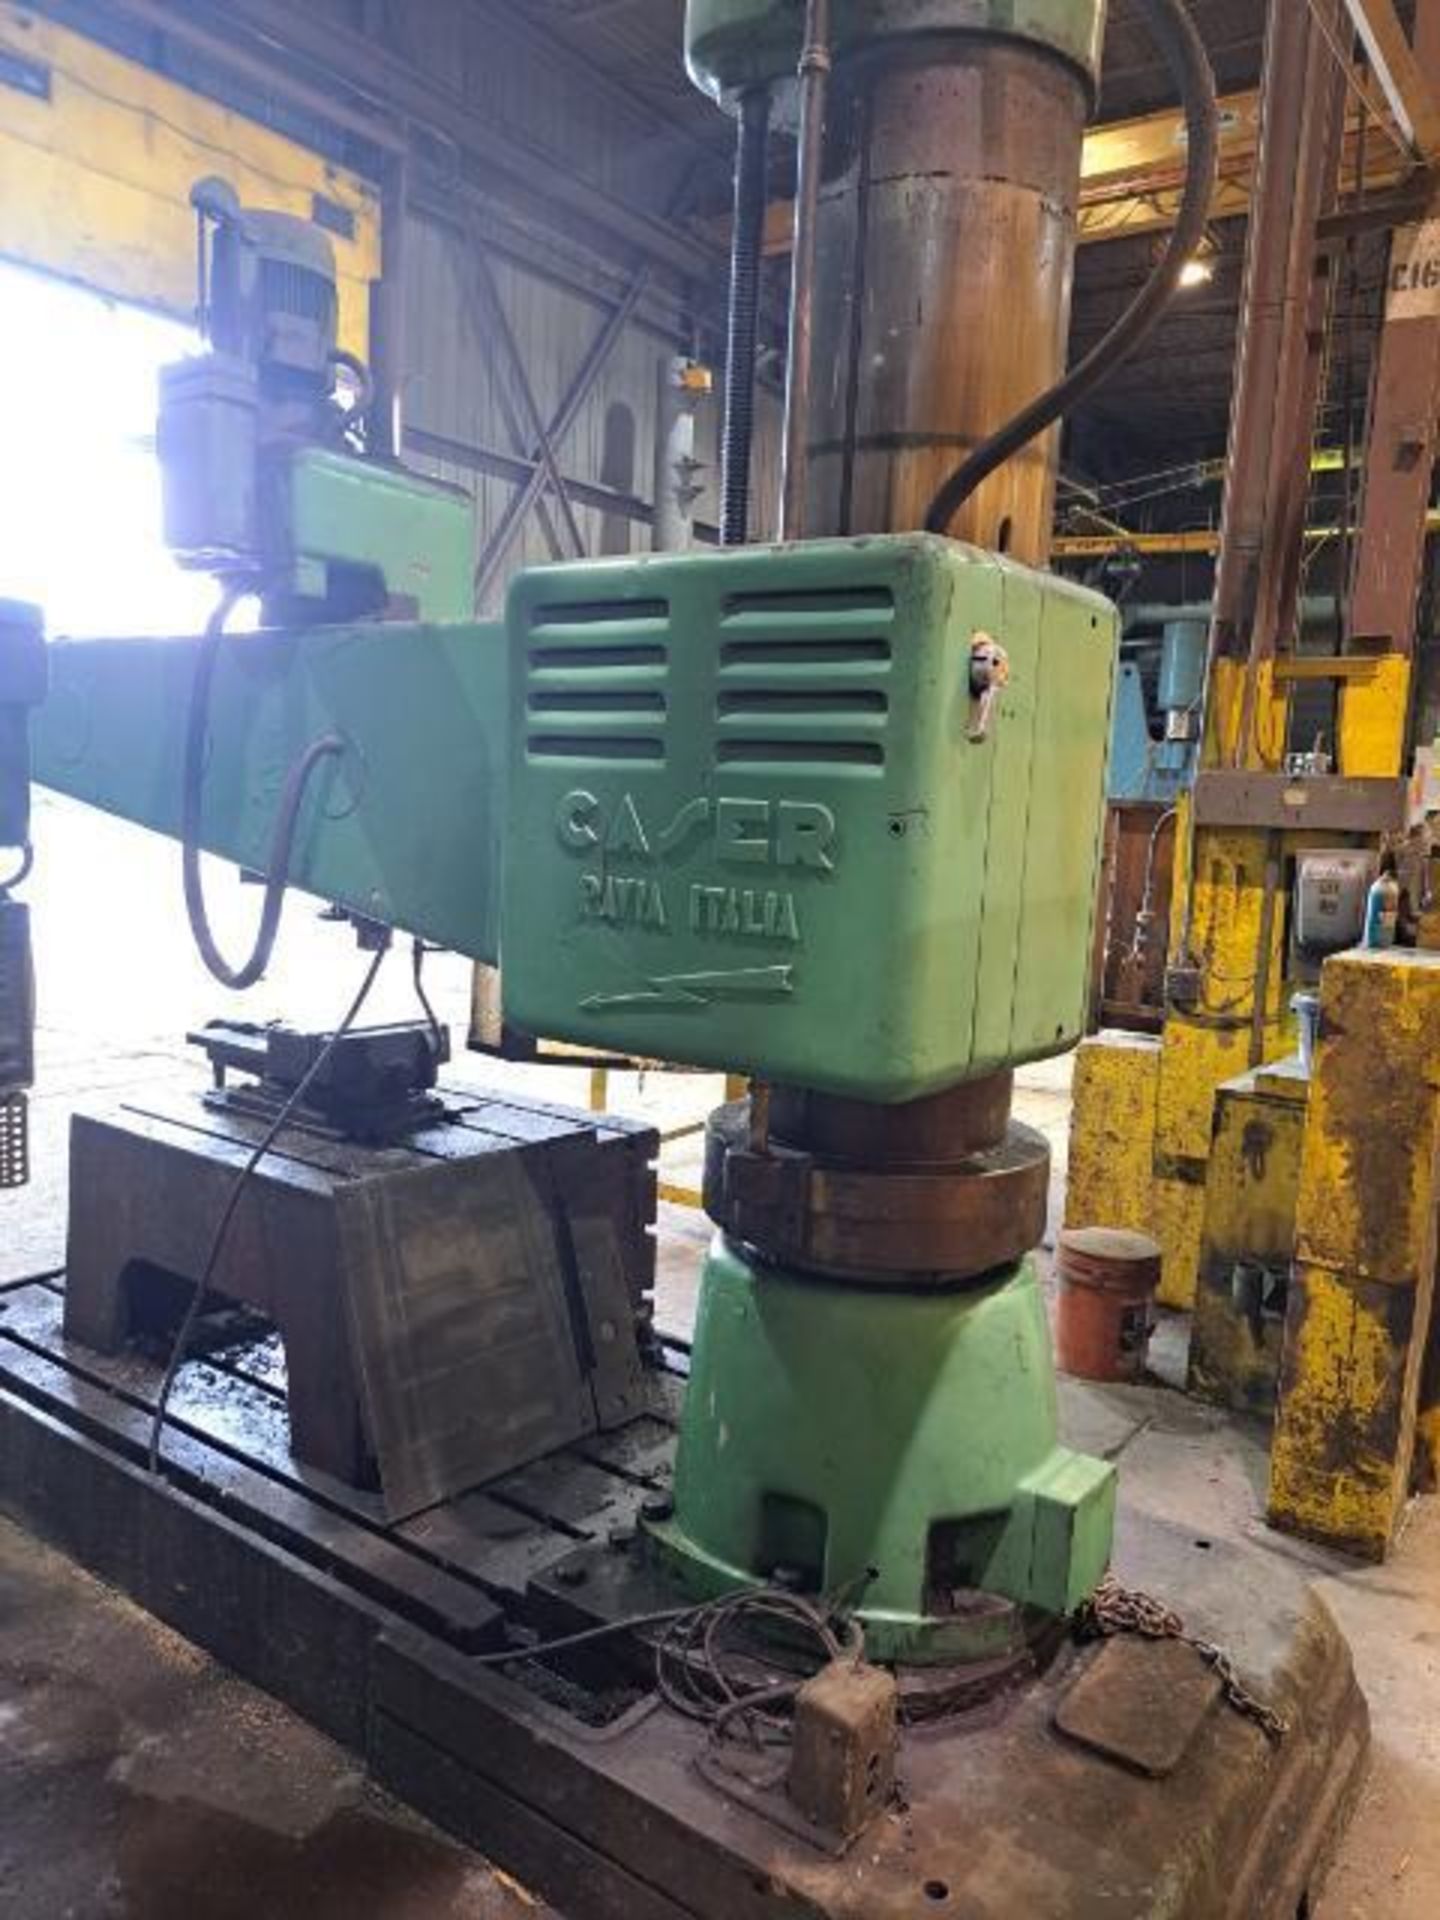 CASER F60-2000, 7' RADIAL ARM DRILL WITH 42"W X 36"L X 22"D, 14" MACHINE VISE, S/N 71005 (SOUTH CENT - Image 6 of 6